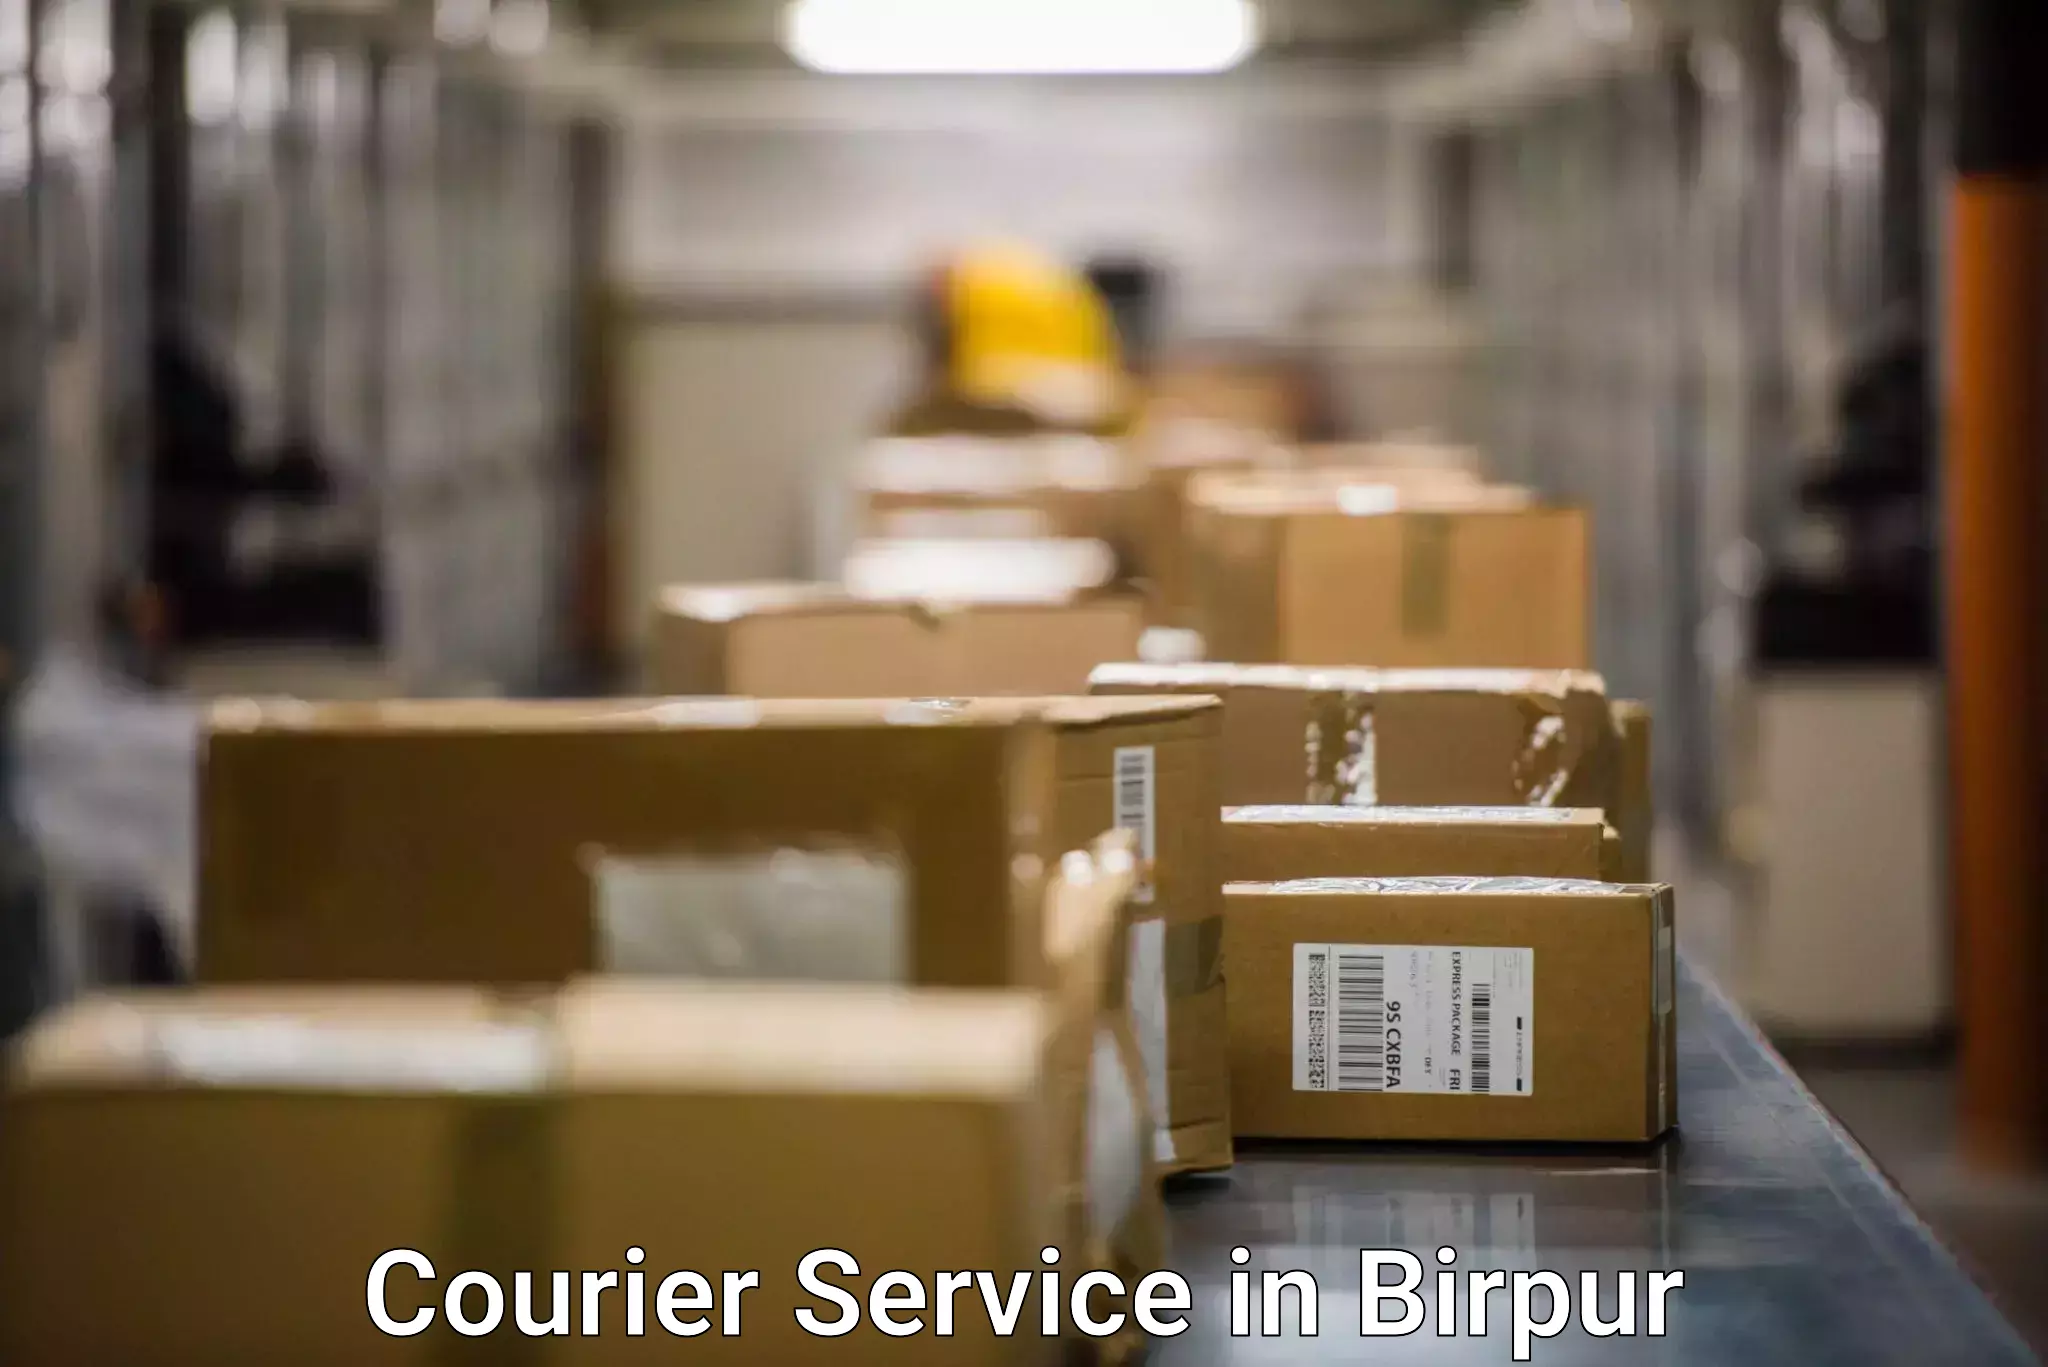 Large-scale shipping solutions in Birpur